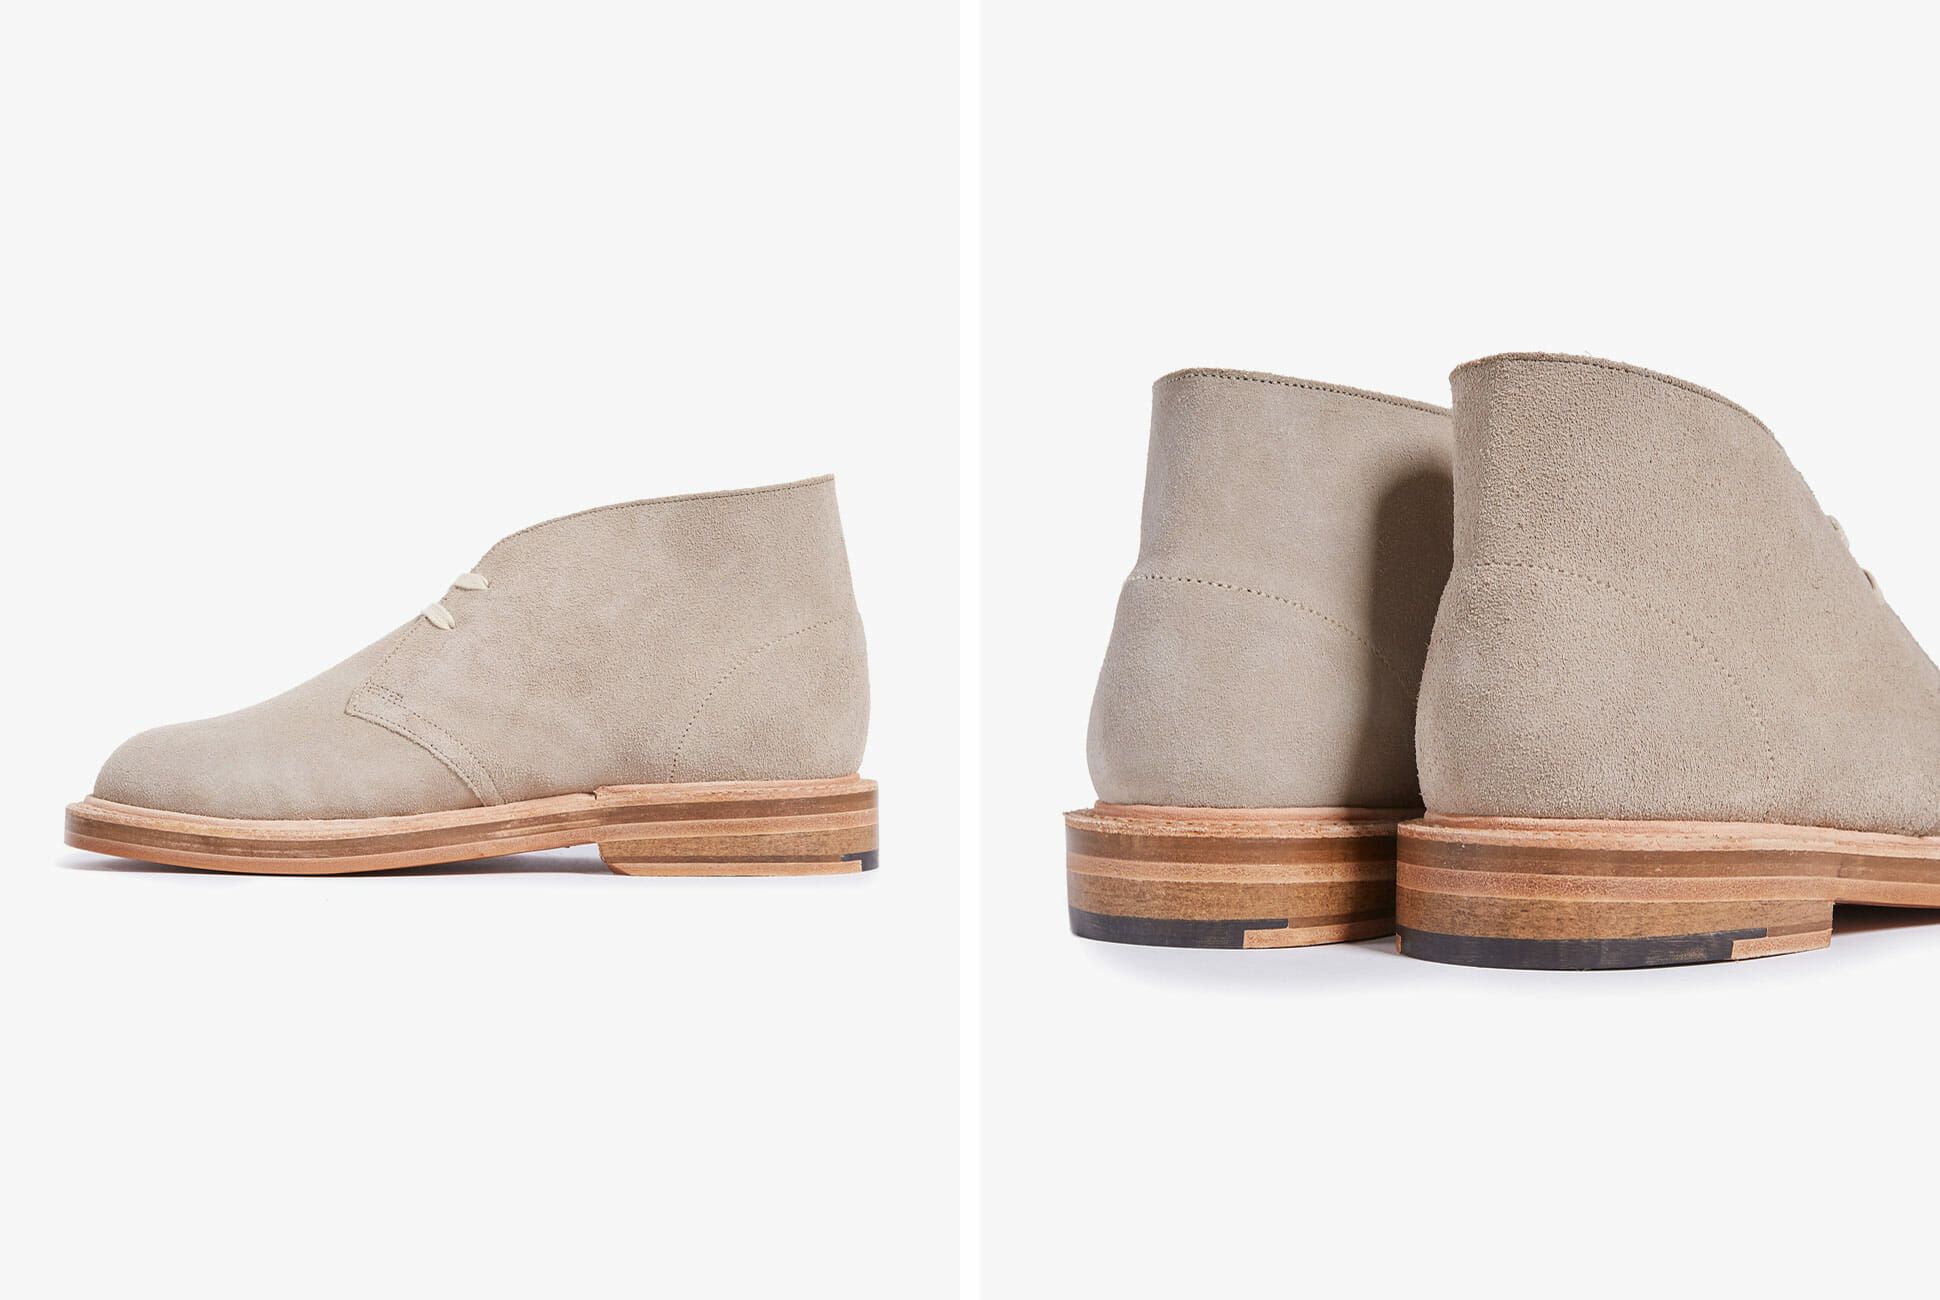 clarks welted desert boots